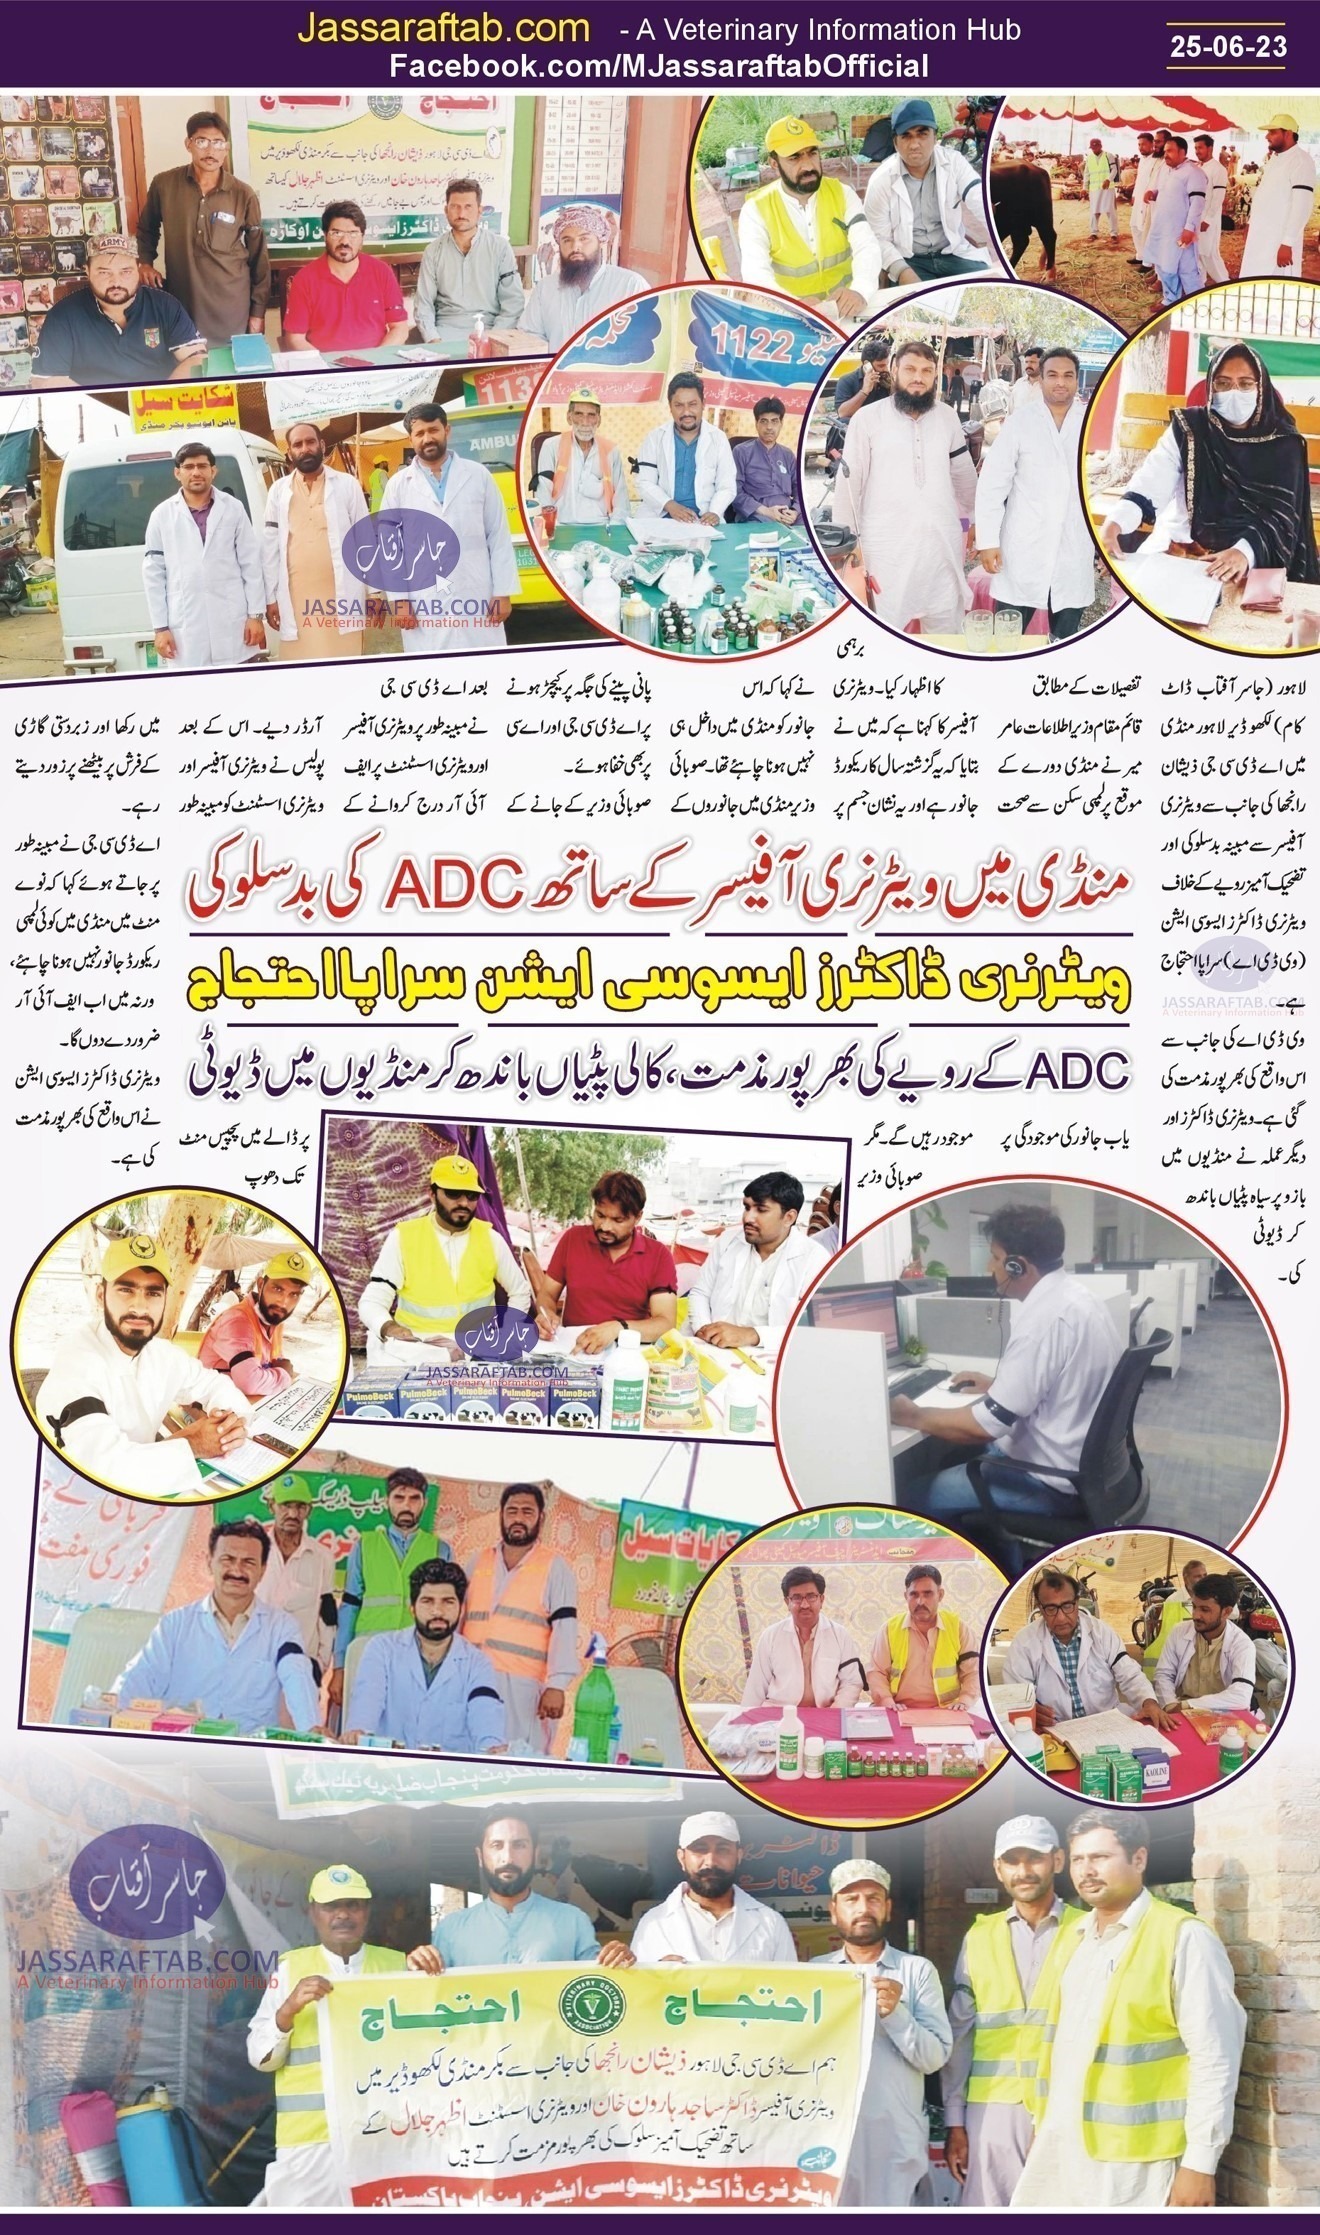 Misbehavior of ADCD with Veterinary Officer